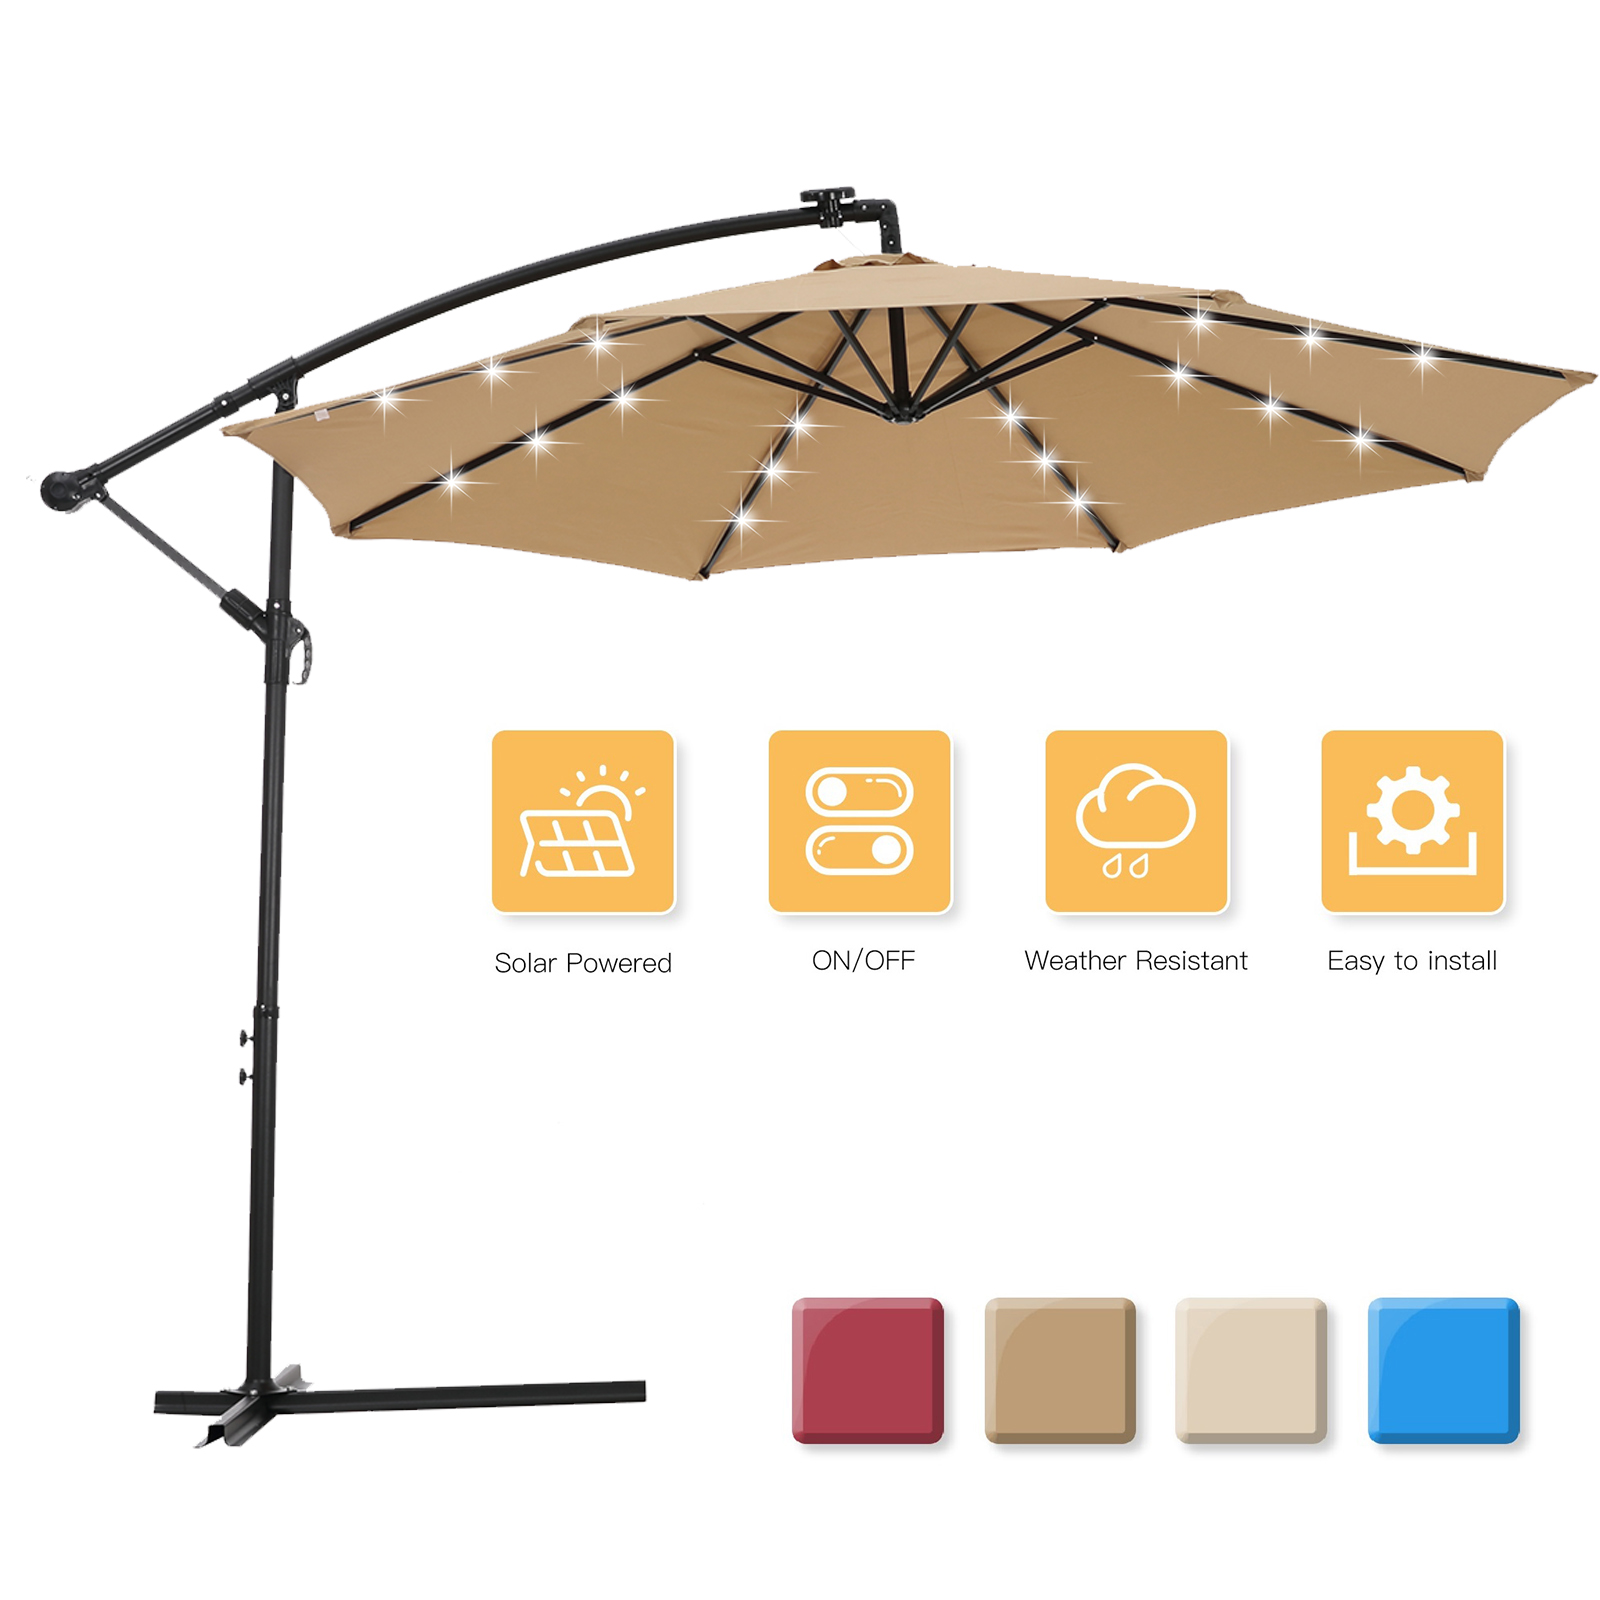 10 FT Solar LED Patio Outdoor Umbrella Hanging Cantilever Umbrella Offset Umbrella Easy Open Adustment with 24 LED Lights -taupe-Boyel Living